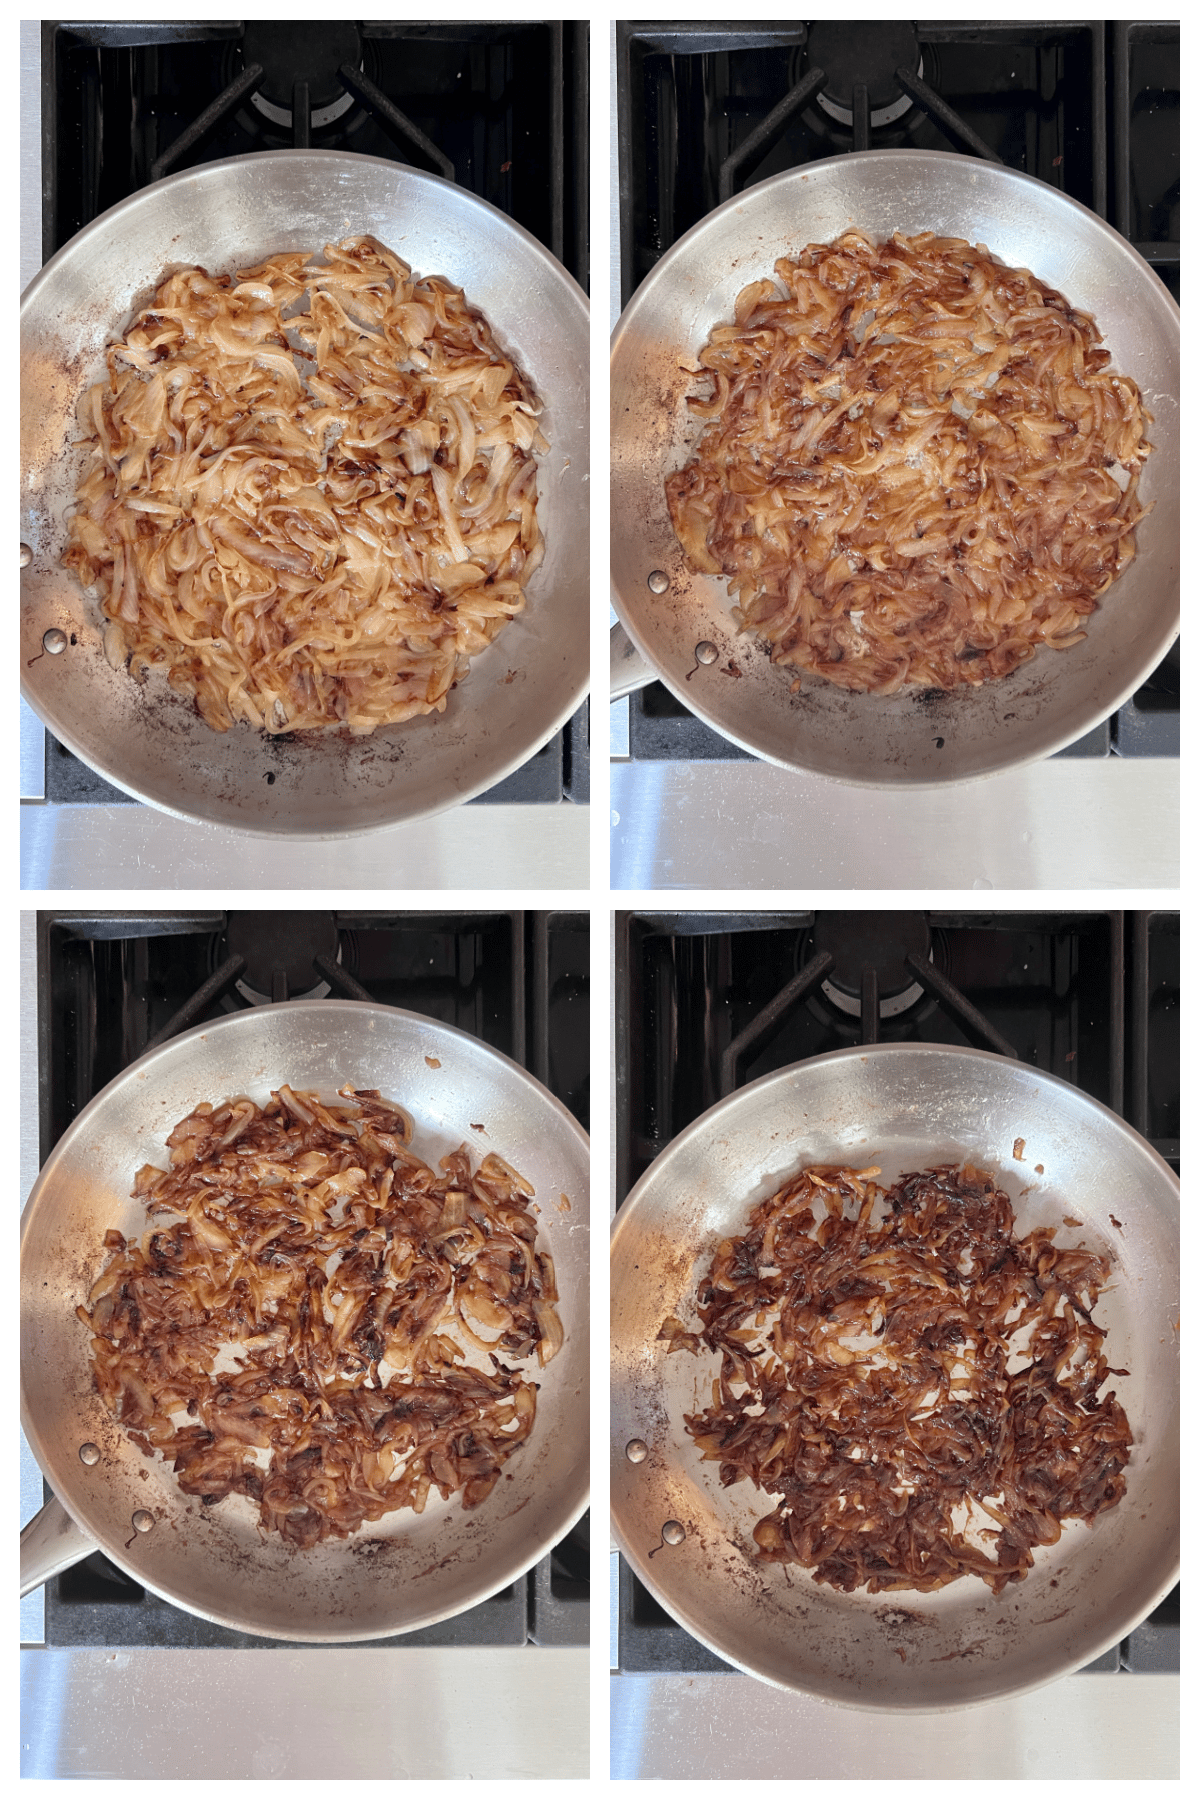 for a how to caramelize onions tutorial, an overhead view of four stages of sliced onions cooking in a stainless skillet - the last 20 minutes bringing a deep golden brown caramelization